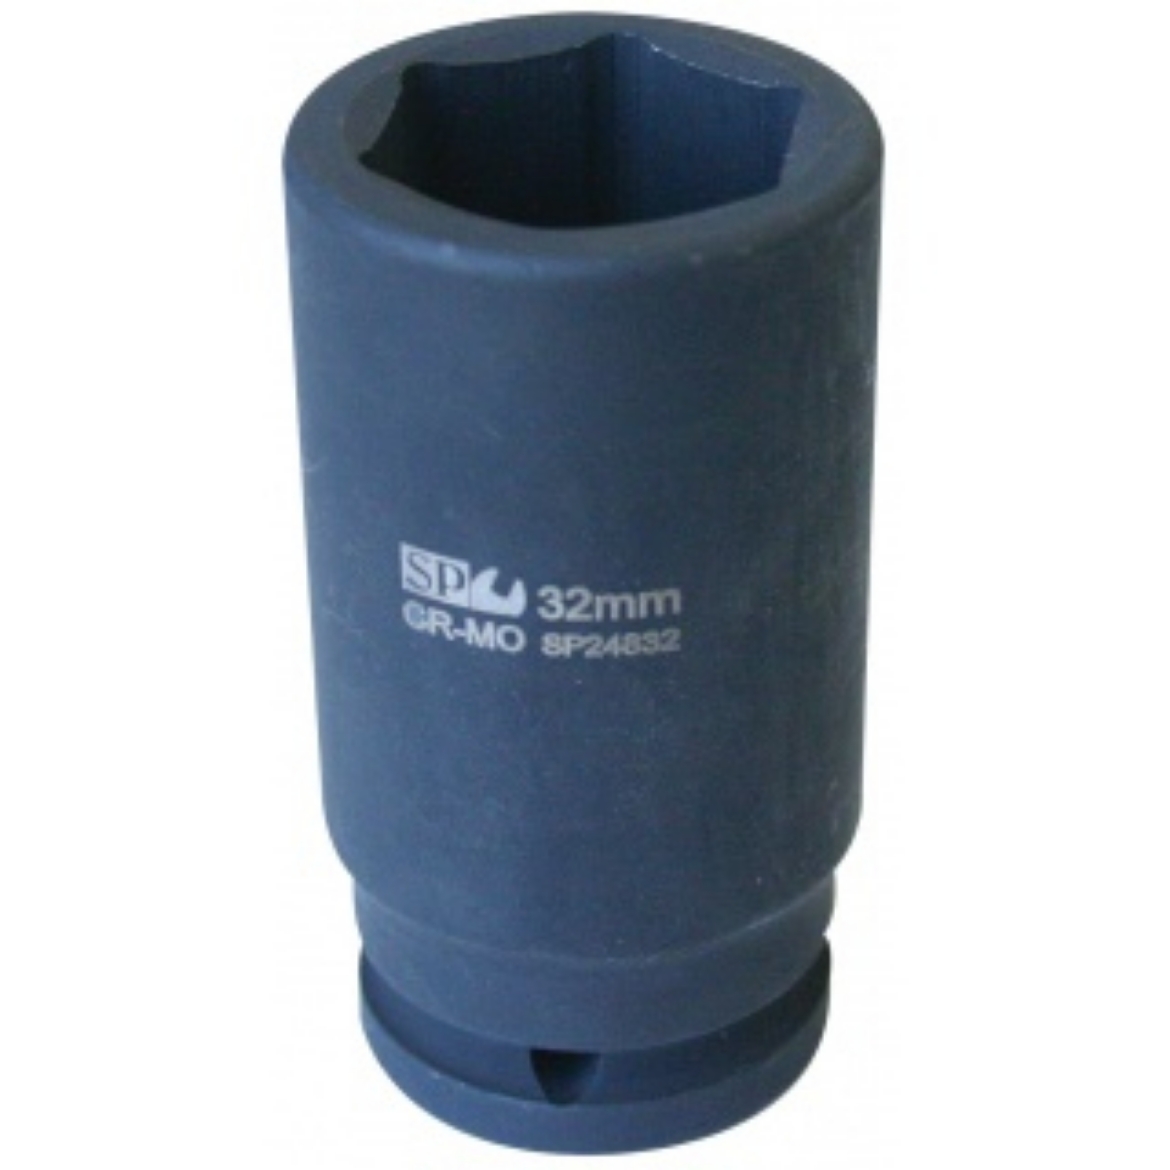 Picture of SOCKET IMPACT 3/4"DR 6PT DEEP METRIC 60MM SP TOOLS